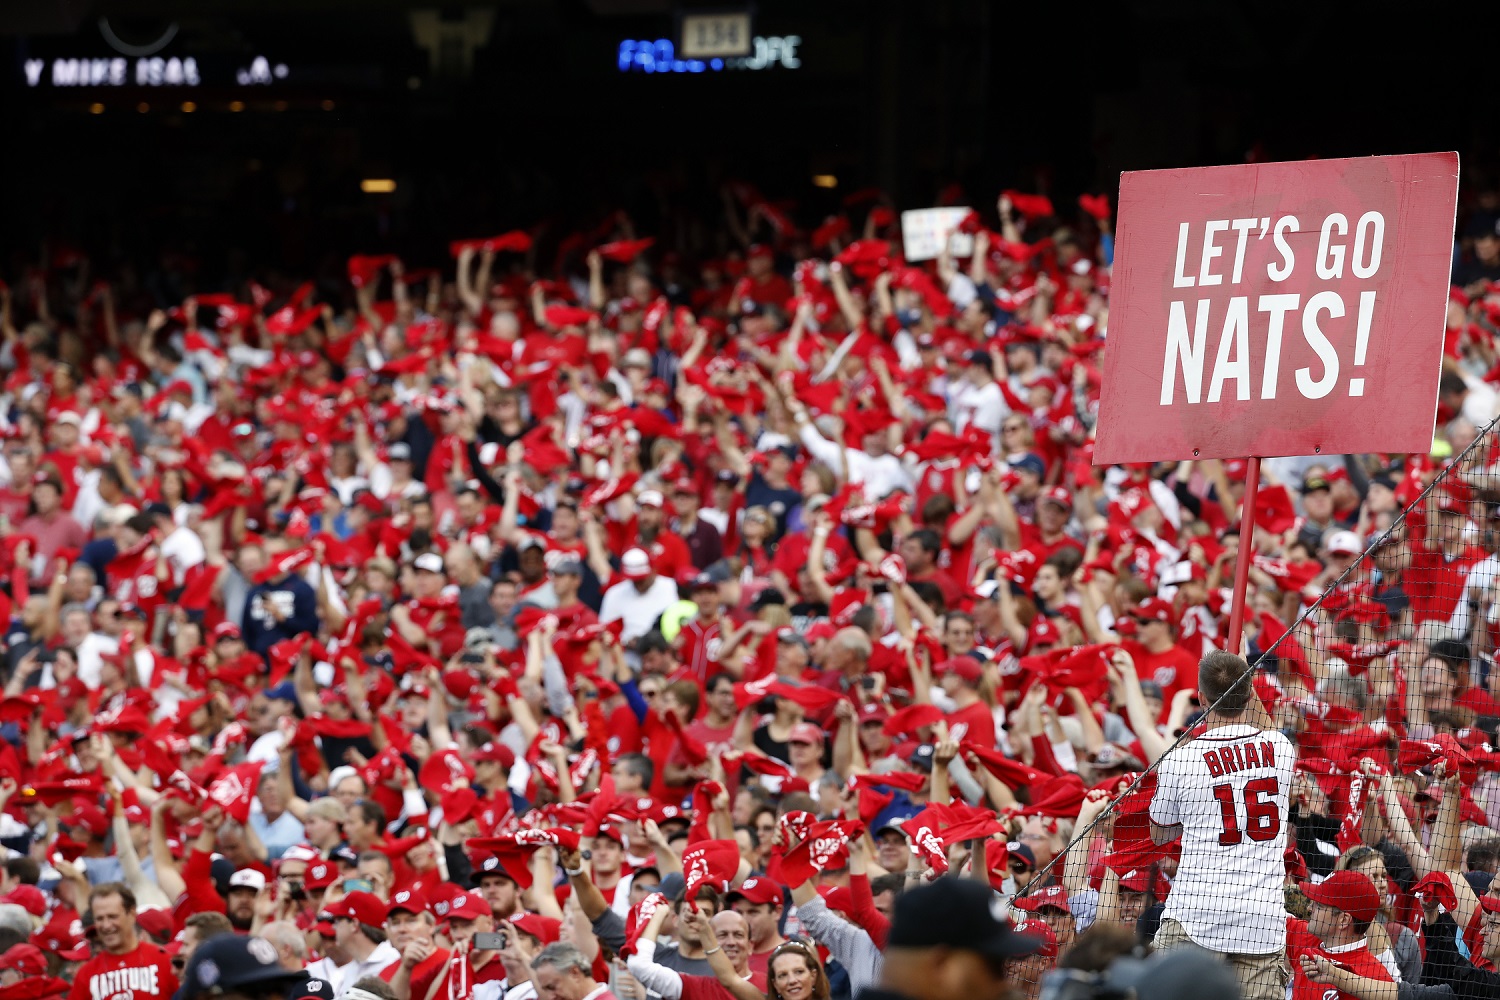 Washington Nationals fans cheer at the start of Game 1 of baseball's National League Division Series between the Washington Nationals and the Los Angeles Dodgers, at Nationals Park, Friday, Oct. 7, 2016, in Washington. (AP Photo/Alex Brandon)